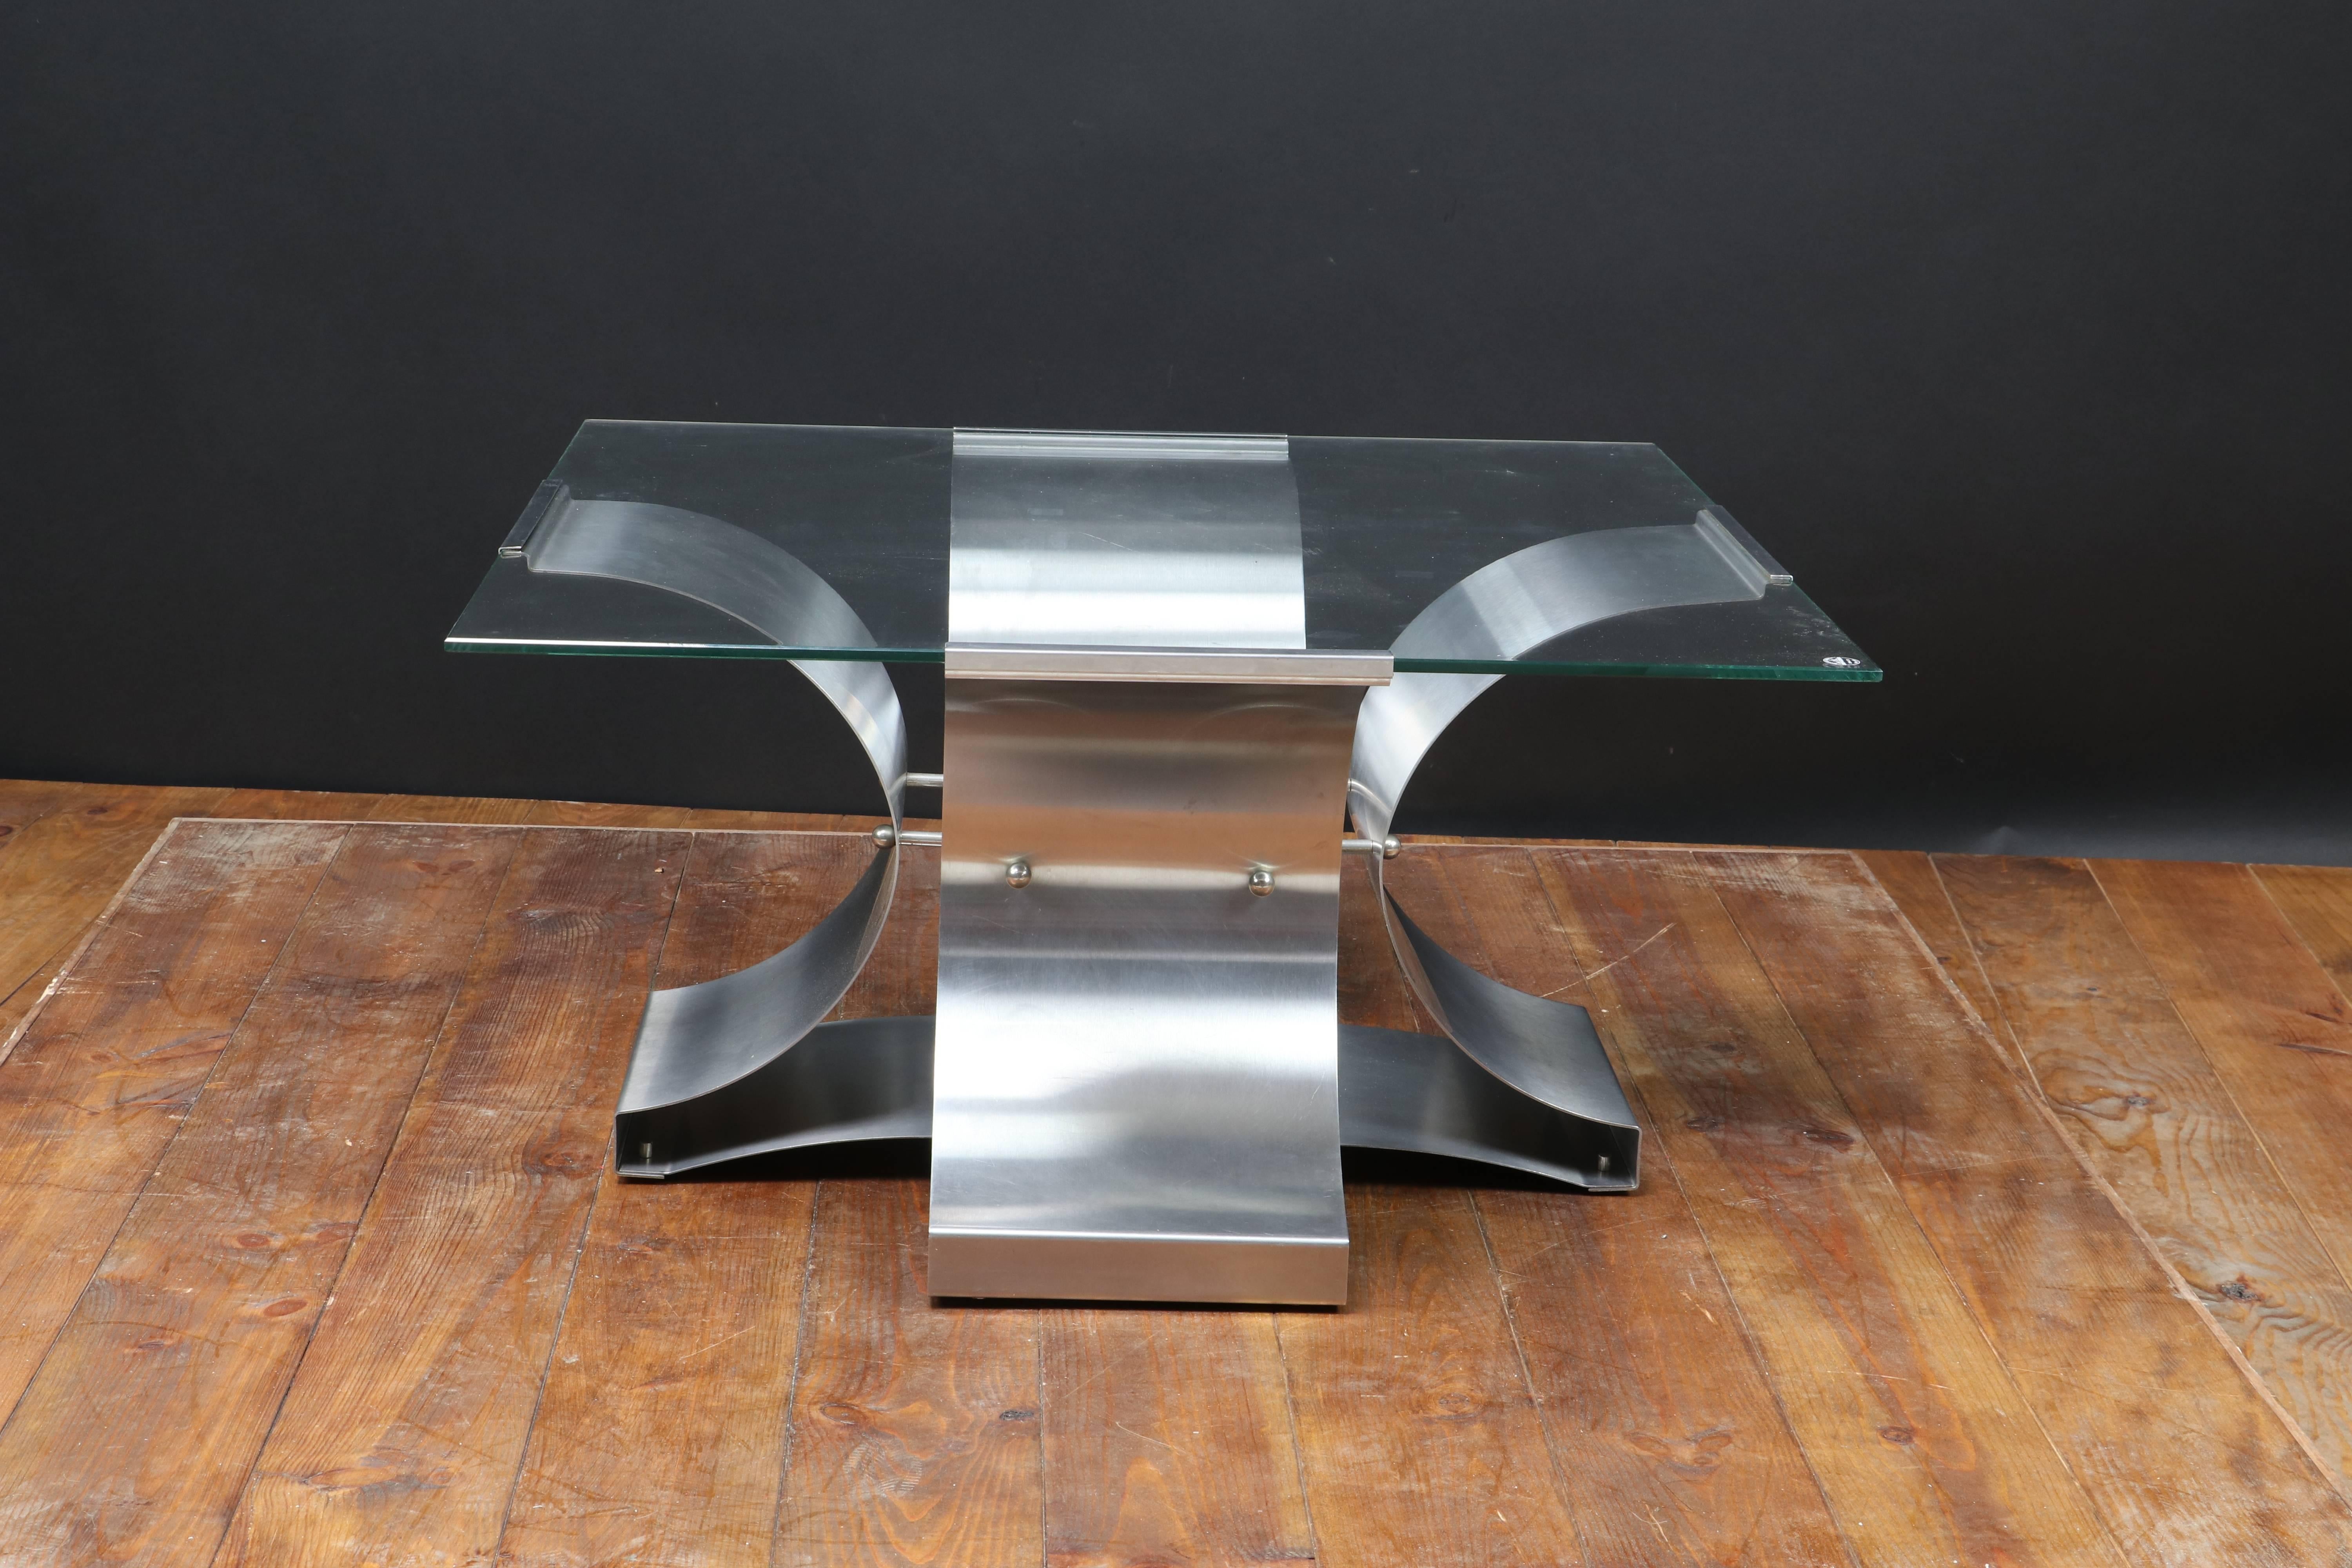 French table produced in the 1970s by Kappa and designed by Francois Monnet.
Stainless steel frame with glass top.
Good general condition, small chipping on the floor under the lock of the structure, visible in photos.
Dimensions: Width 90 cm x